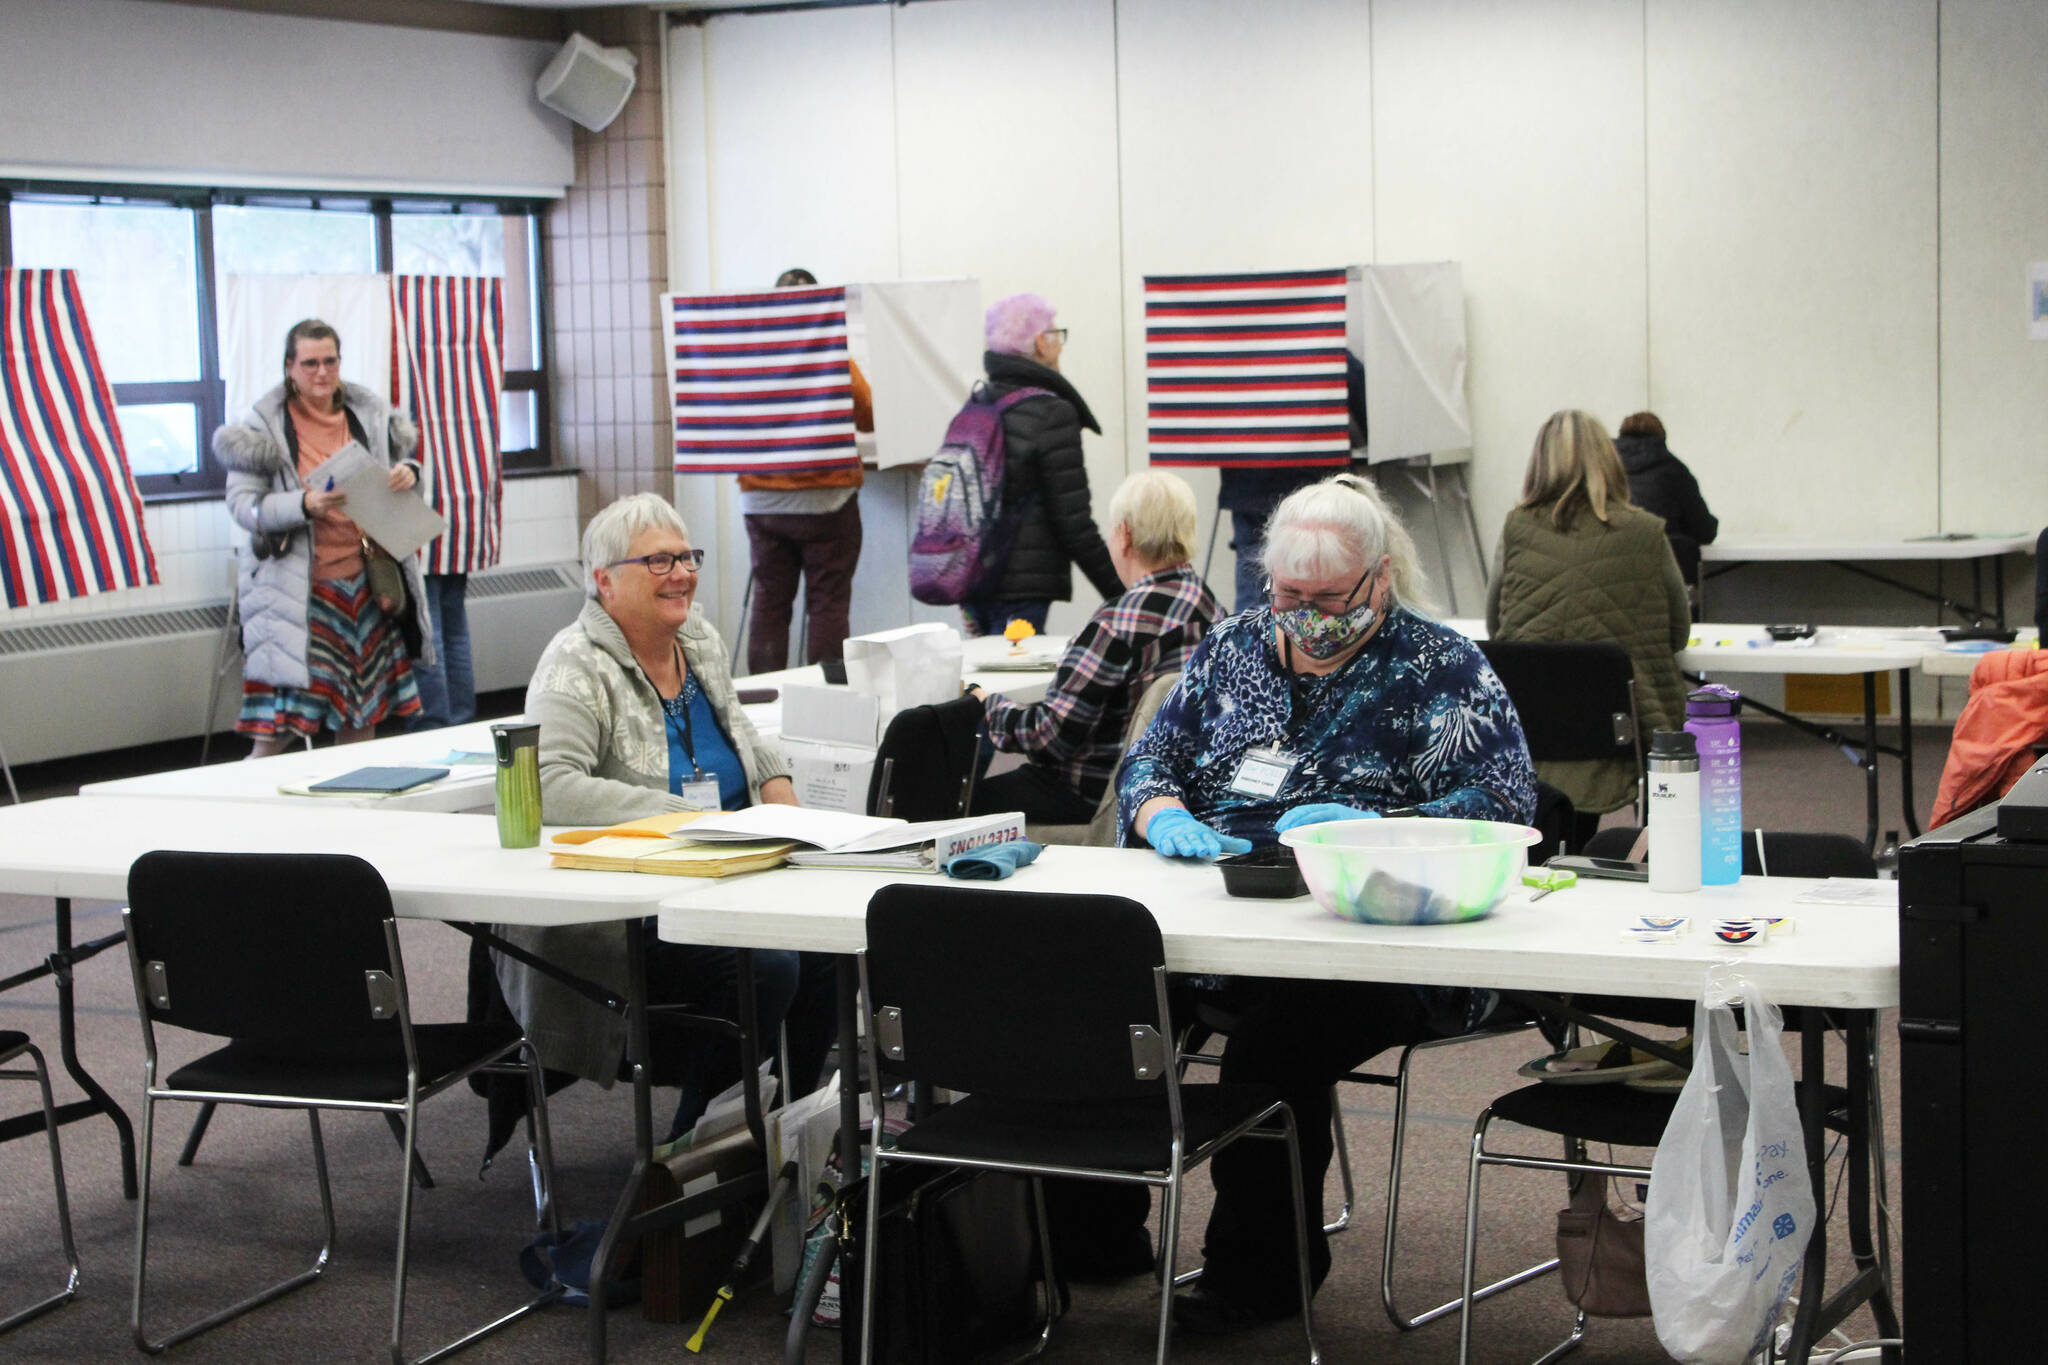 K-Beach Precinct Chair Kathy Carson (right) and Carol Louthan (left) assist voters at the Soldotna Regional Sports Complex on Tuesday, Nov. 8, 2022 in Soldotna, Alaska. (Ashlyn O’Hara/Peninsula Clarion)